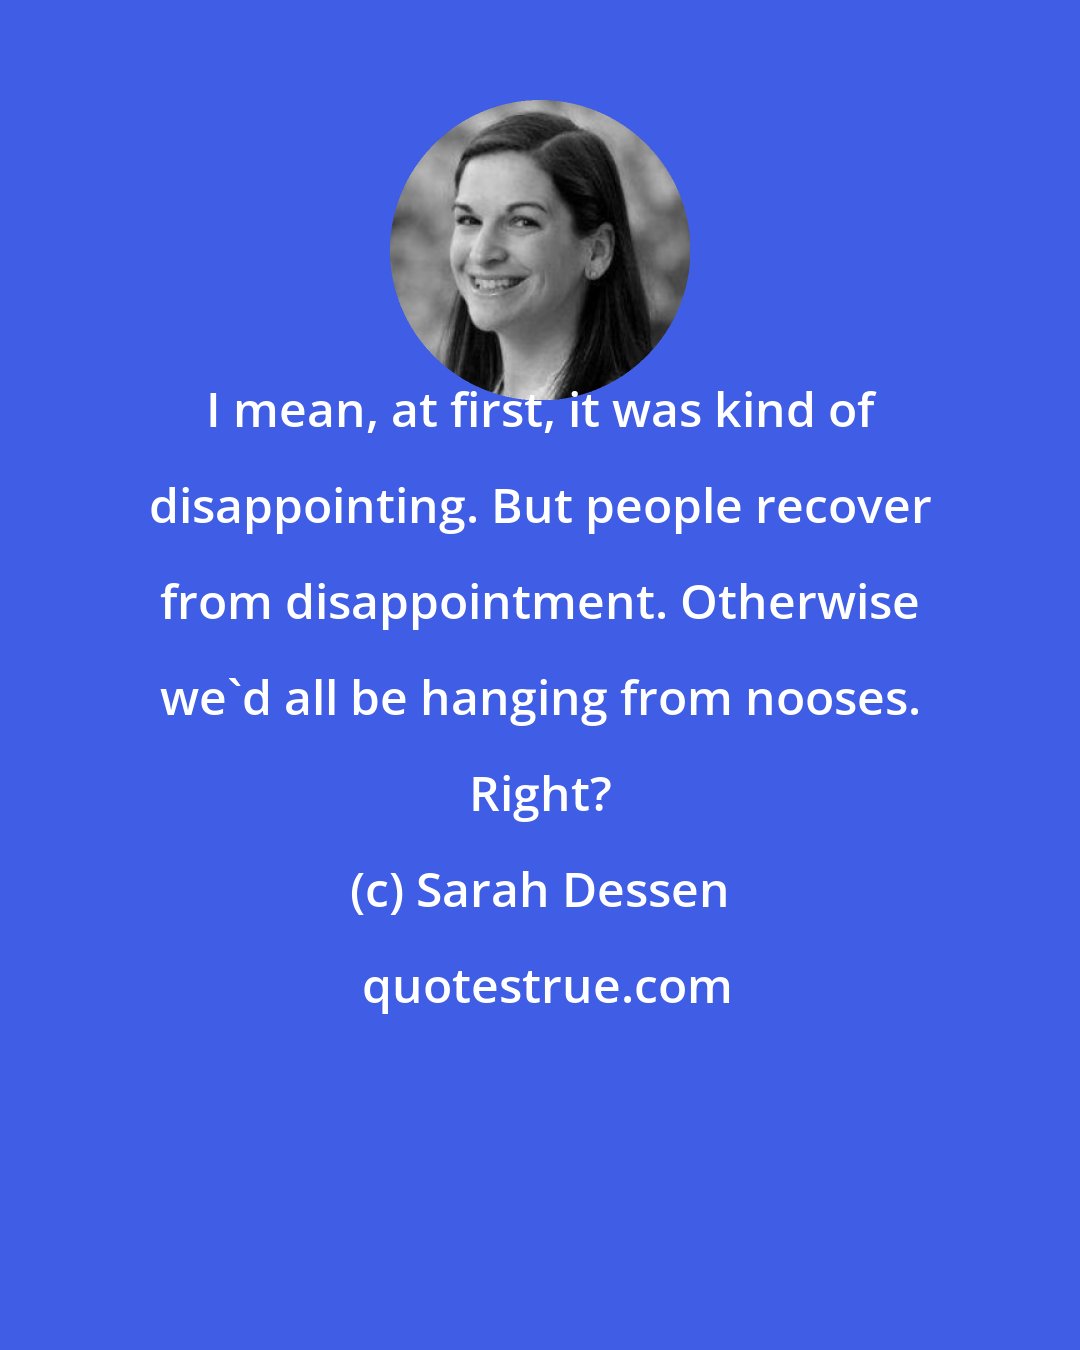 Sarah Dessen: I mean, at first, it was kind of disappointing. But people recover from disappointment. Otherwise we'd all be hanging from nooses. Right?